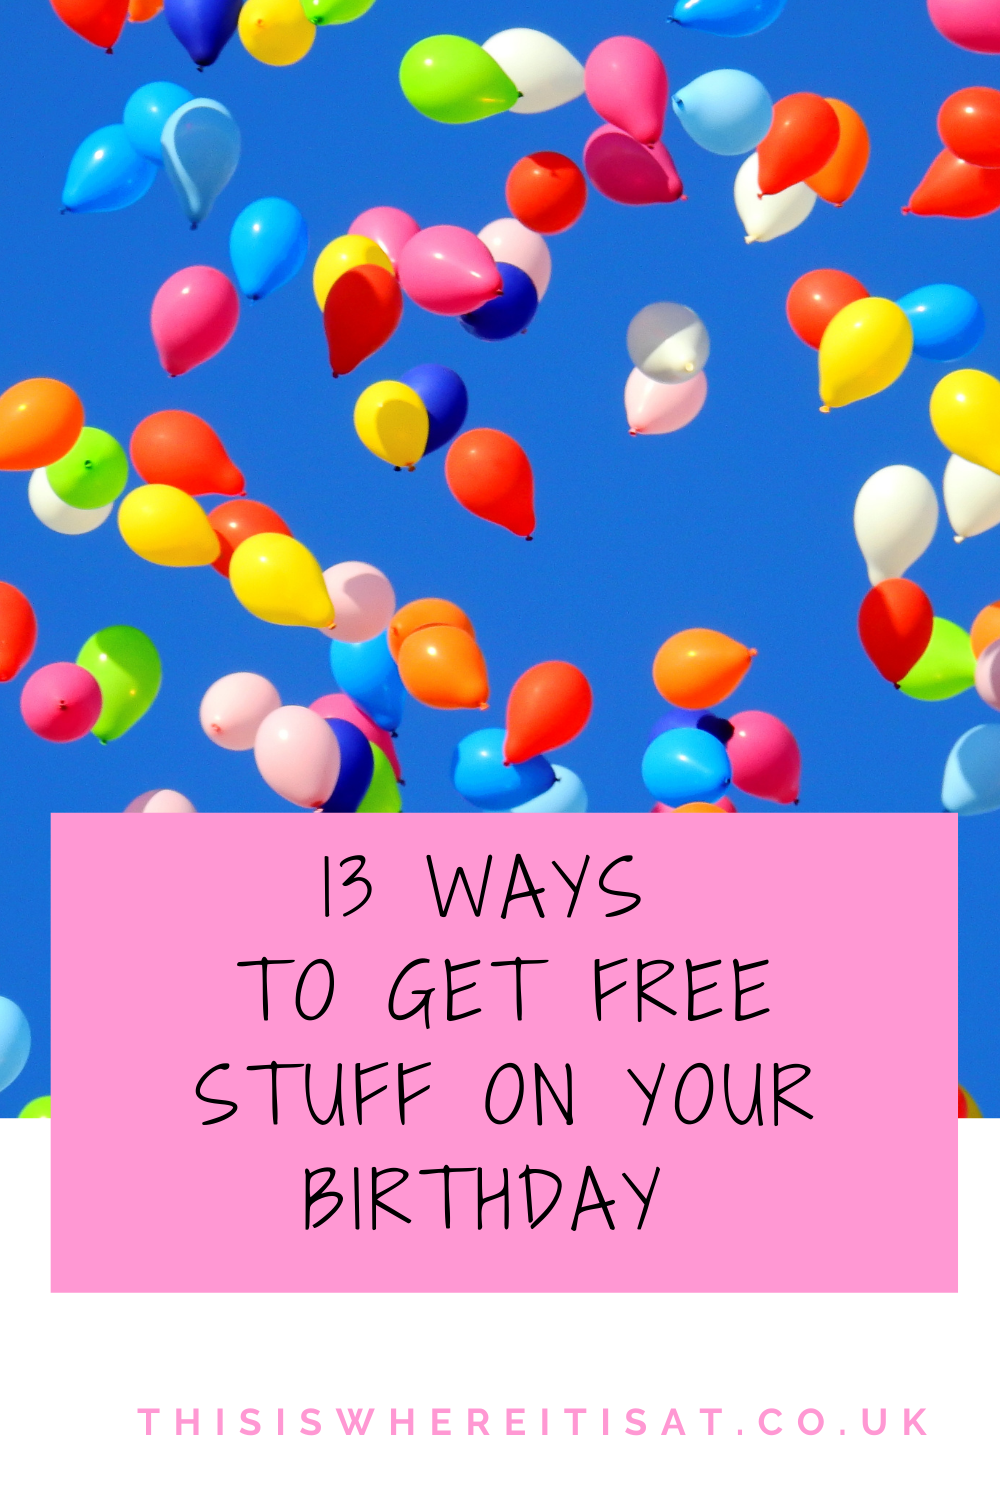 13 ways to get free stuff on your birthday THIS IS WHERE IT IS AT